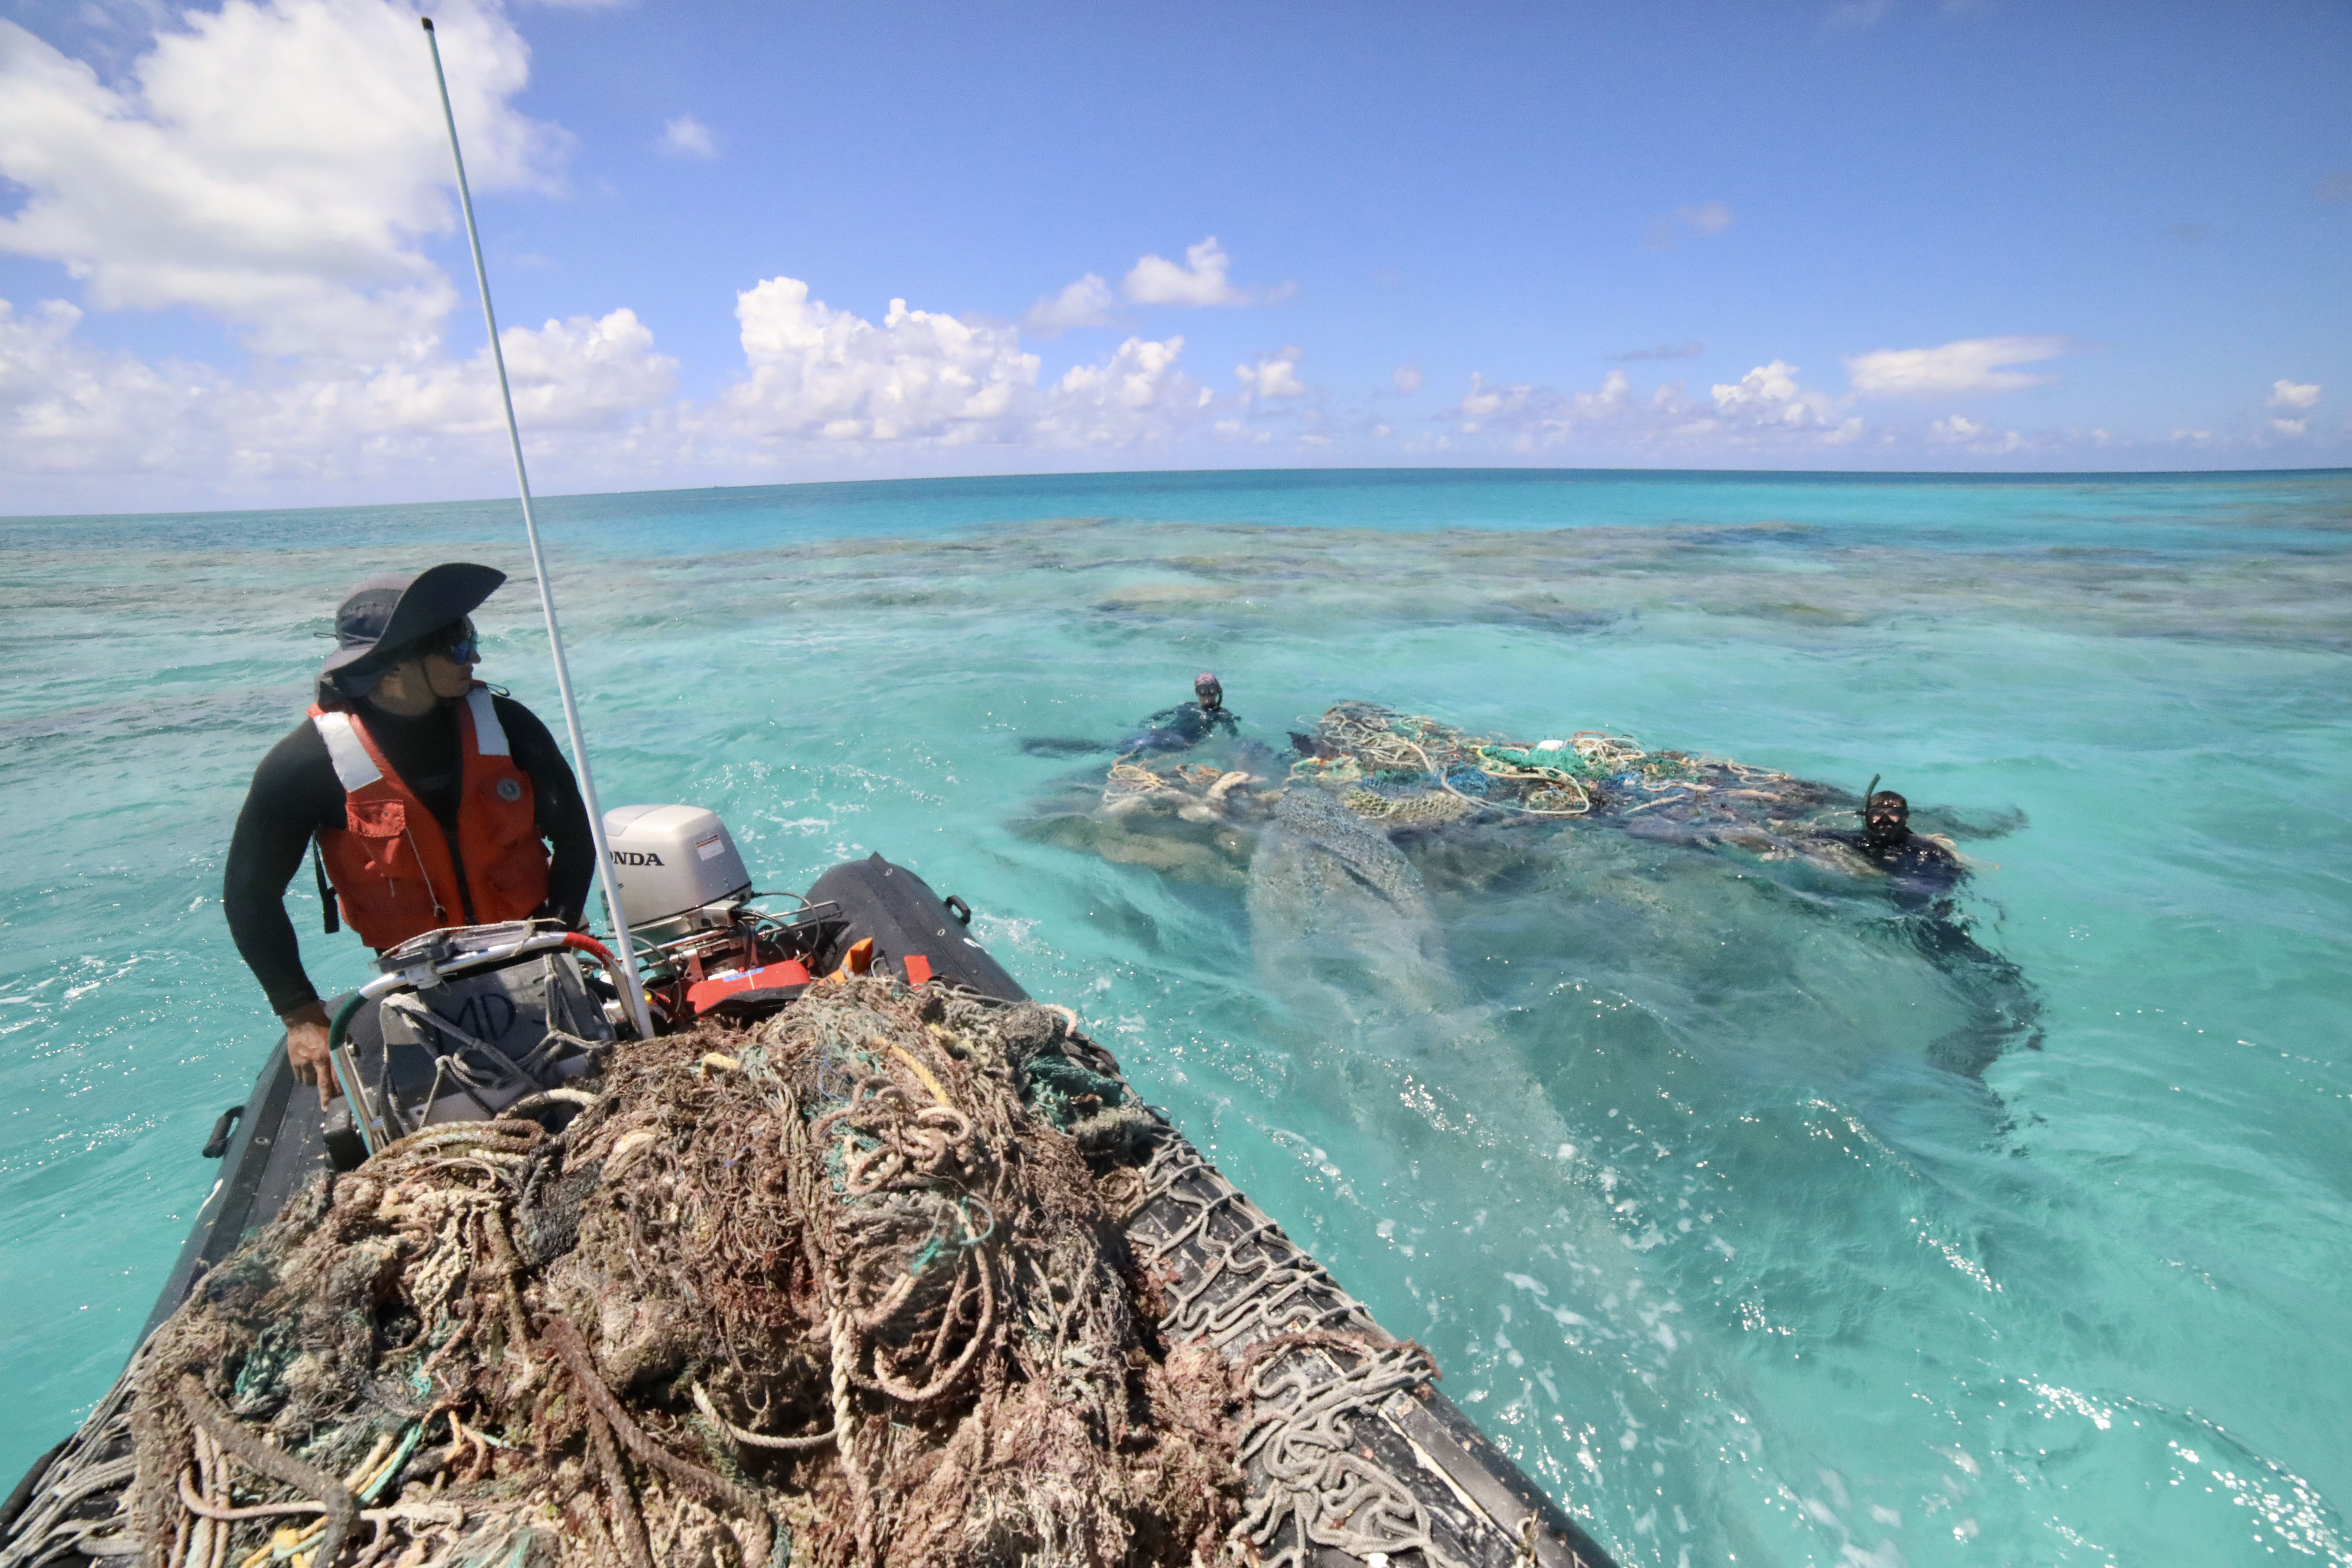 Image: Success of the 2021 Mission to Clean up Marine Debris